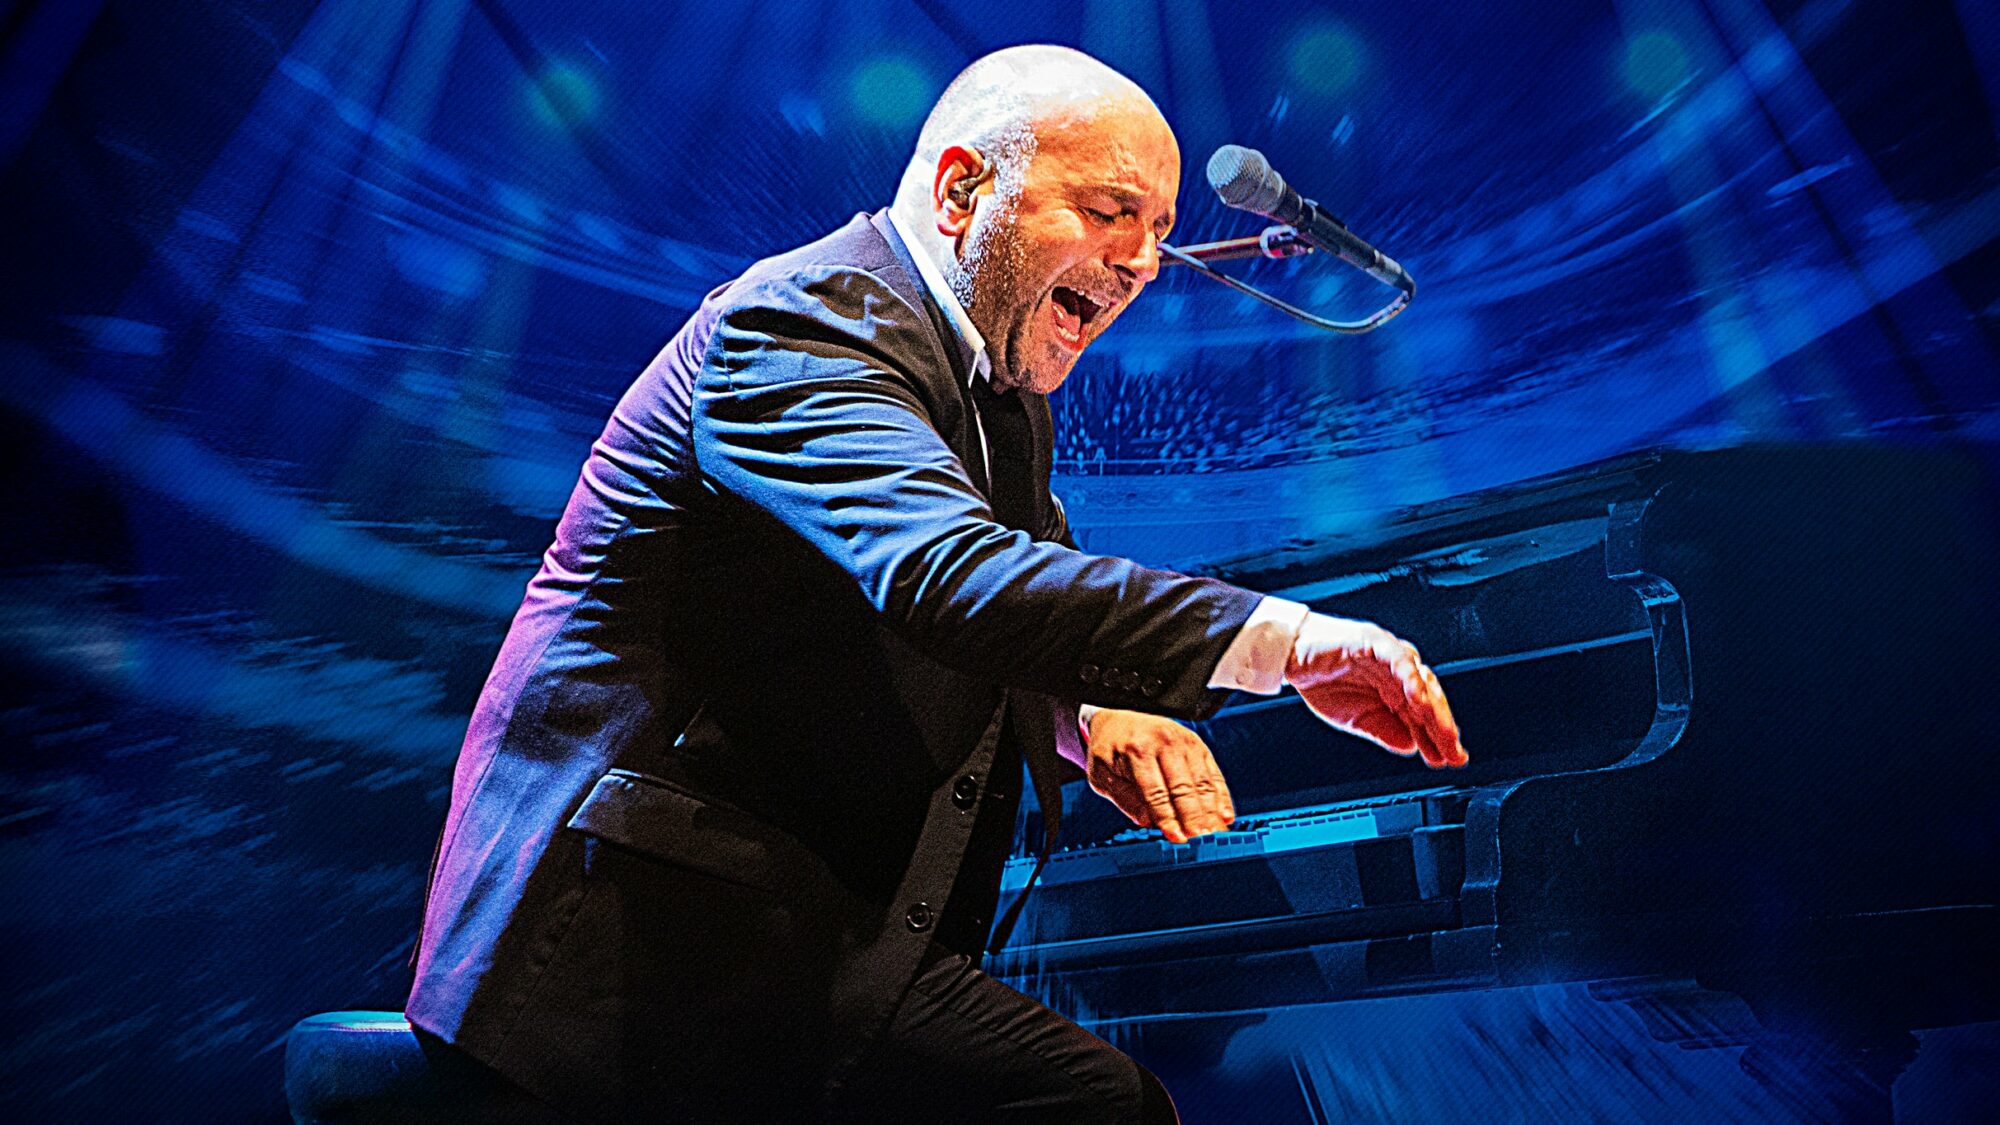 Image name The Billy Joel Songbook at Hull City Hall Hull the 33 image from the post The Billy Joel Songbook at Sheffield City Hall Oval Hall, Sheffield in Yorkshire.com.